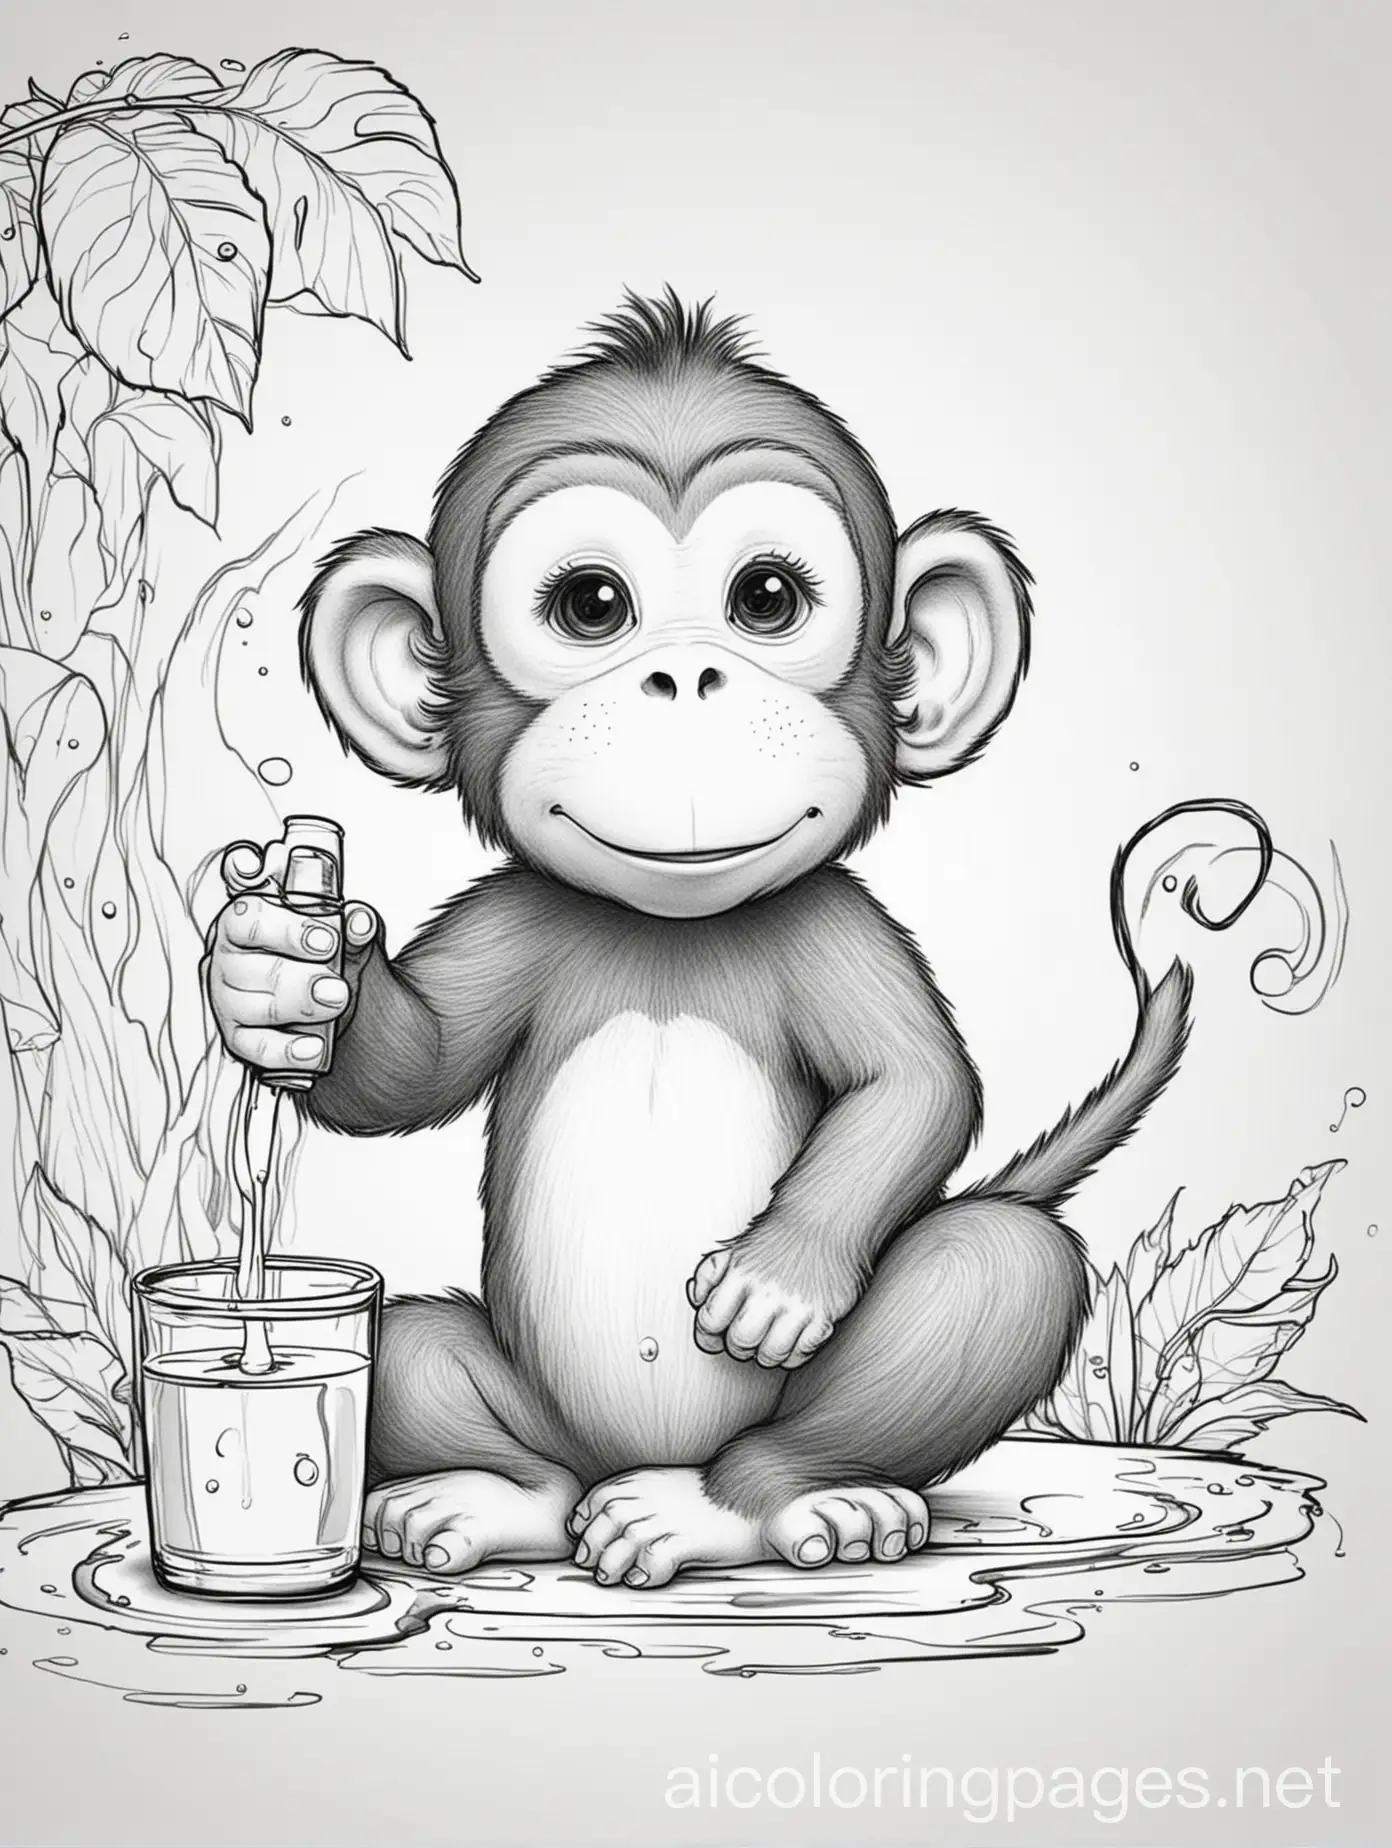 Adorable-Monkey-Drinking-Water-Coloring-Page-for-Kids